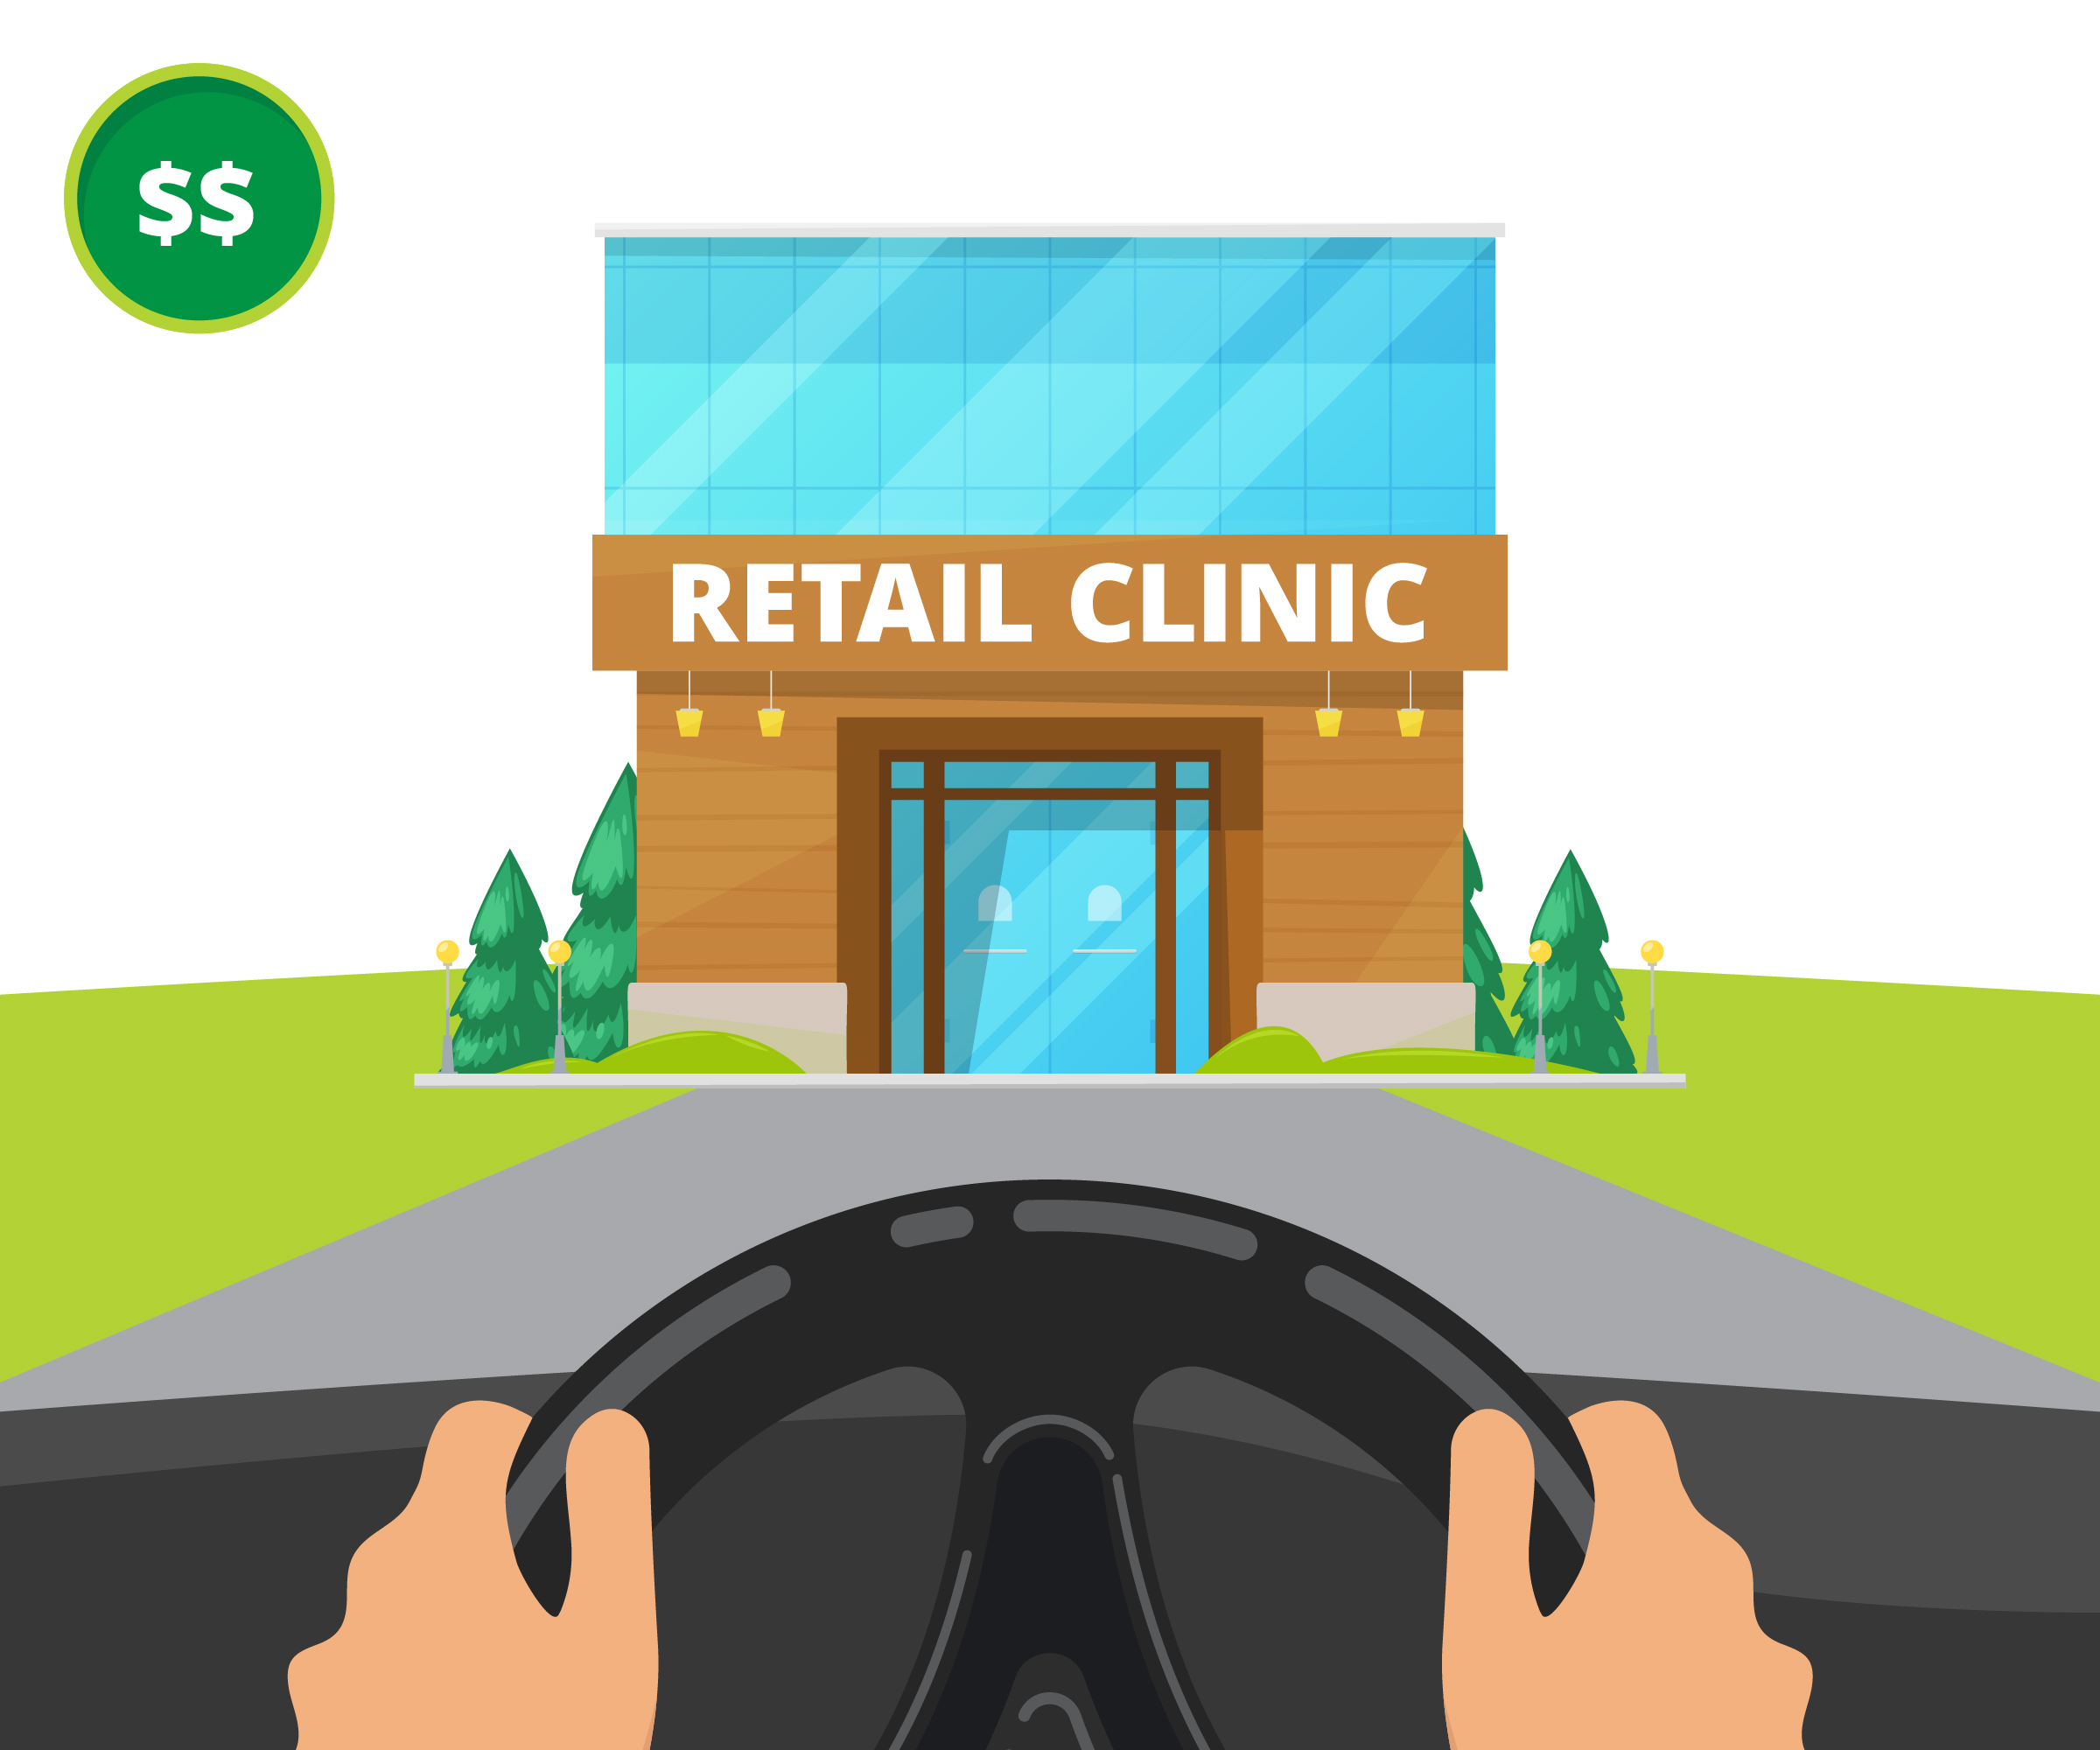 Illustration of a retail clinic